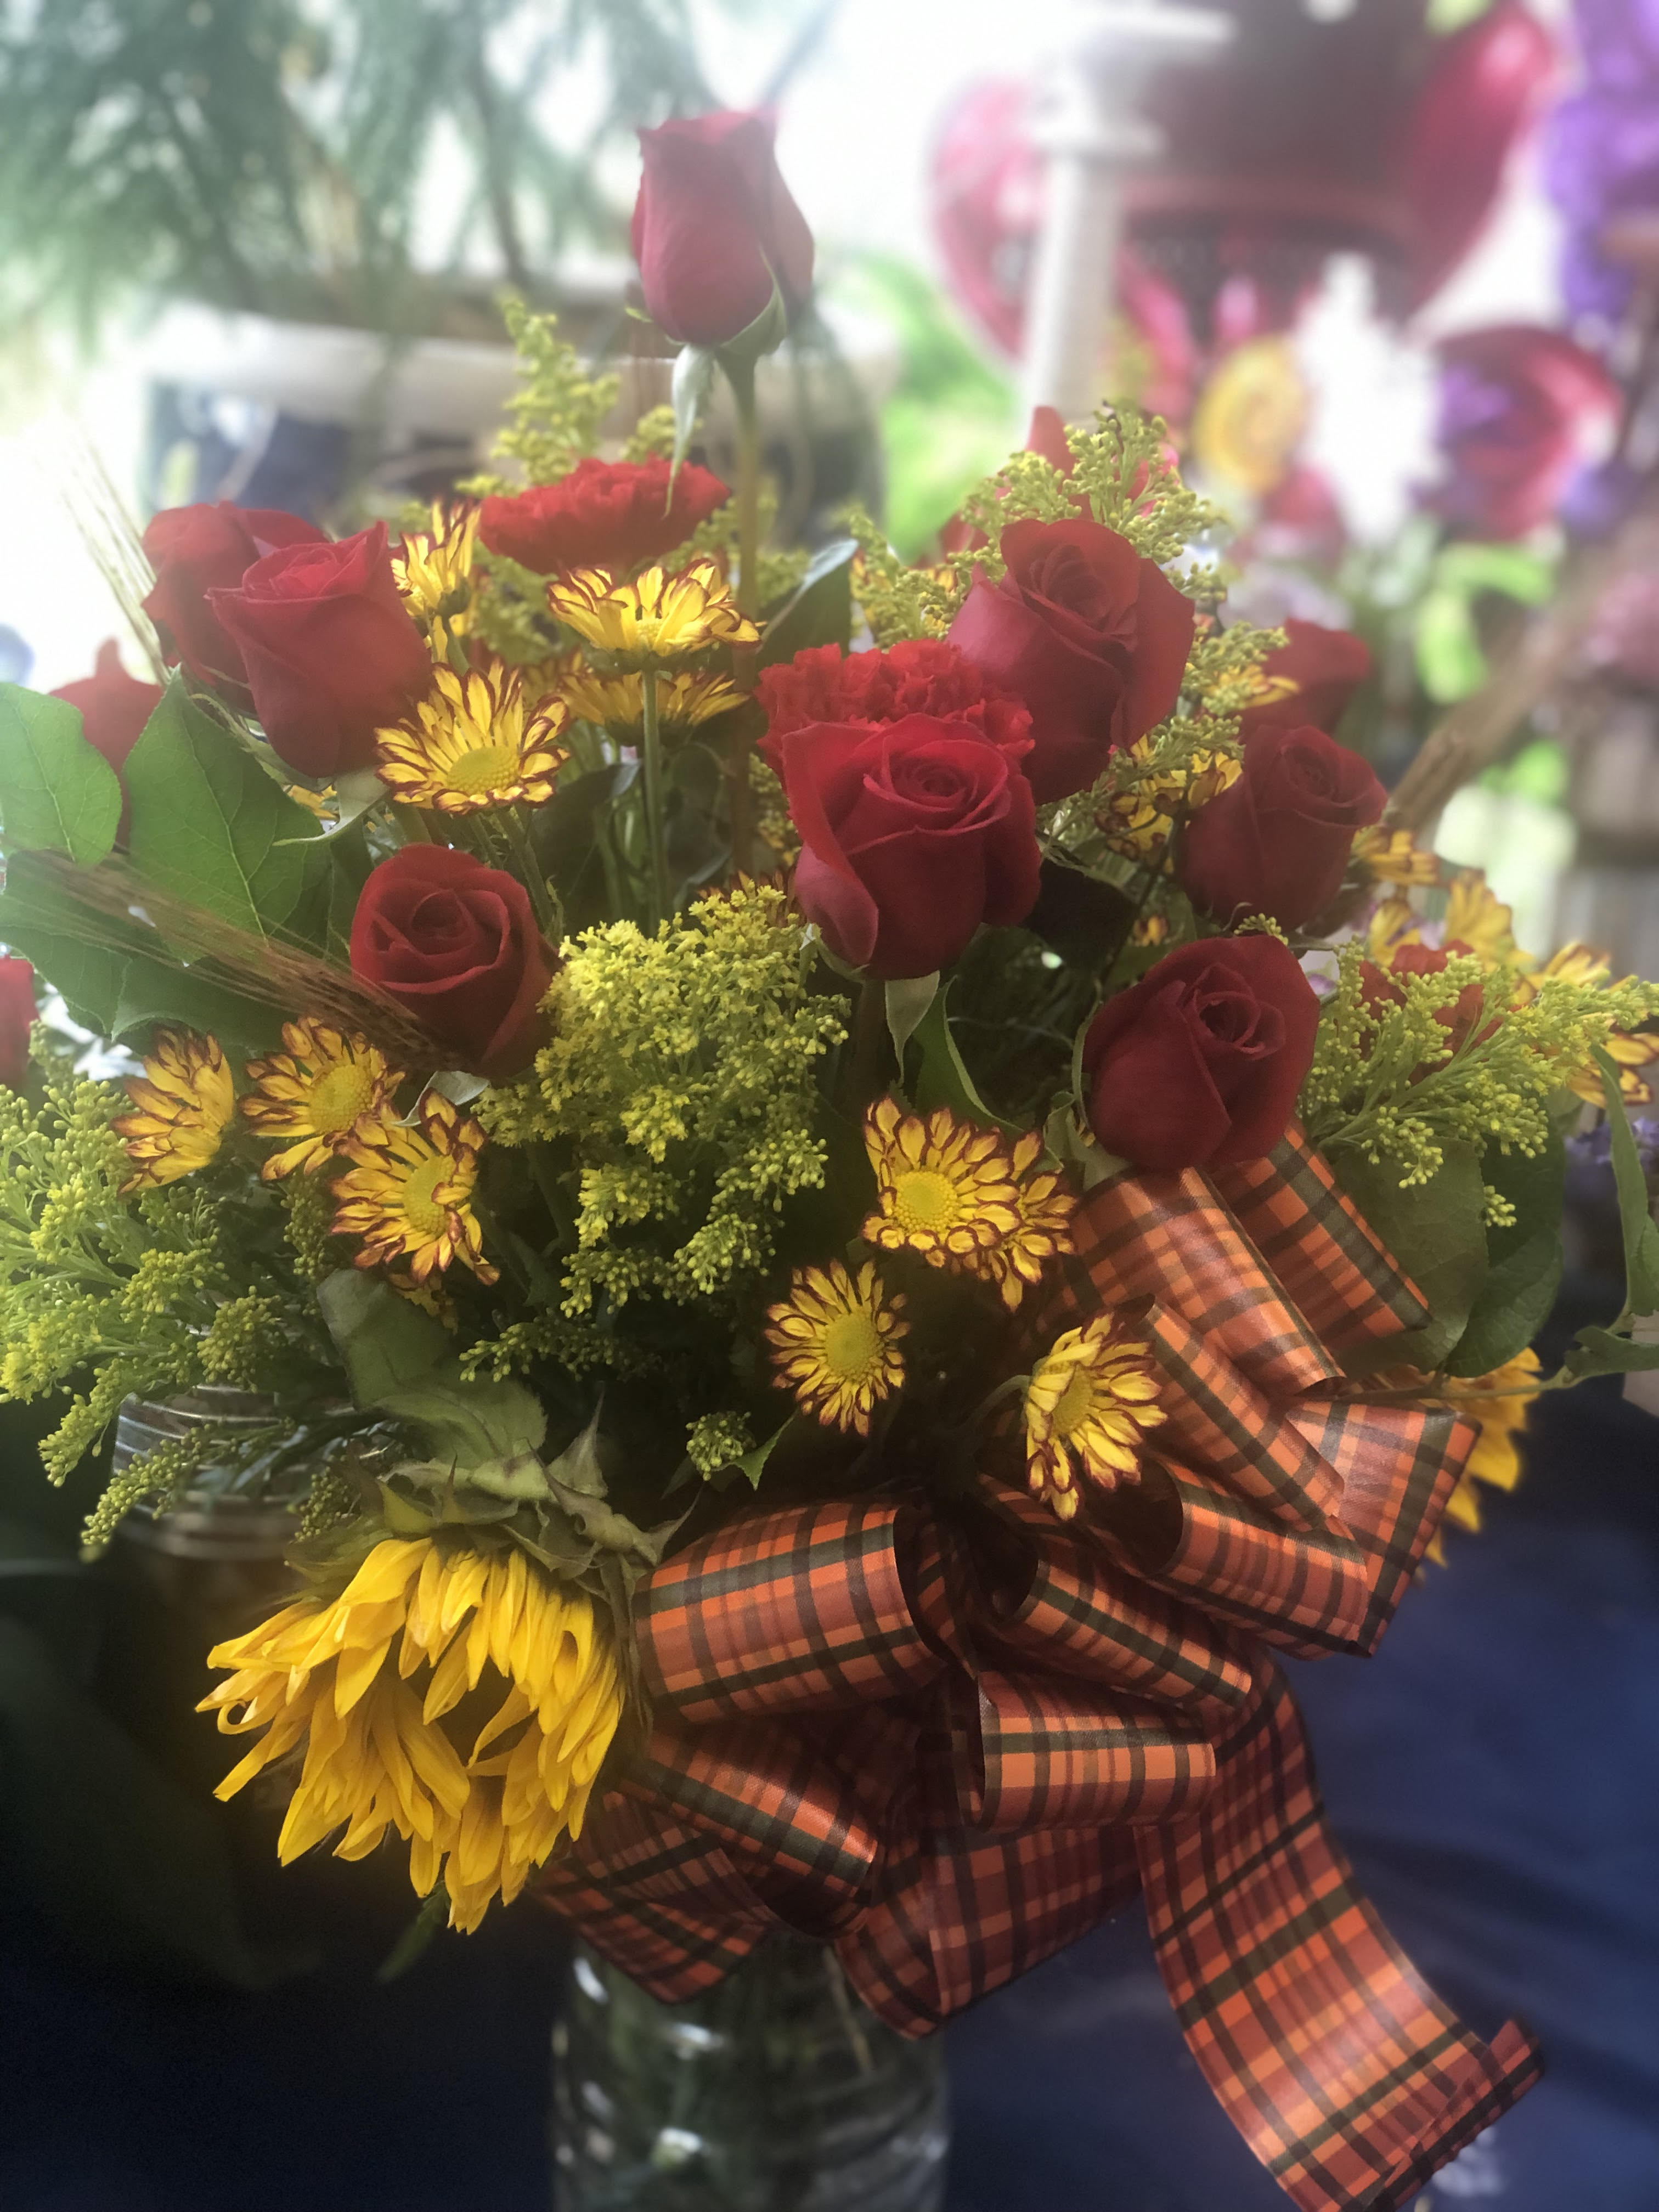 Fall In Love - It's easy to fall in love with the shades of autumn  - send a dozen roses plus other blooms and embellishment in the shades of fall in one of our glass vases to the one you love